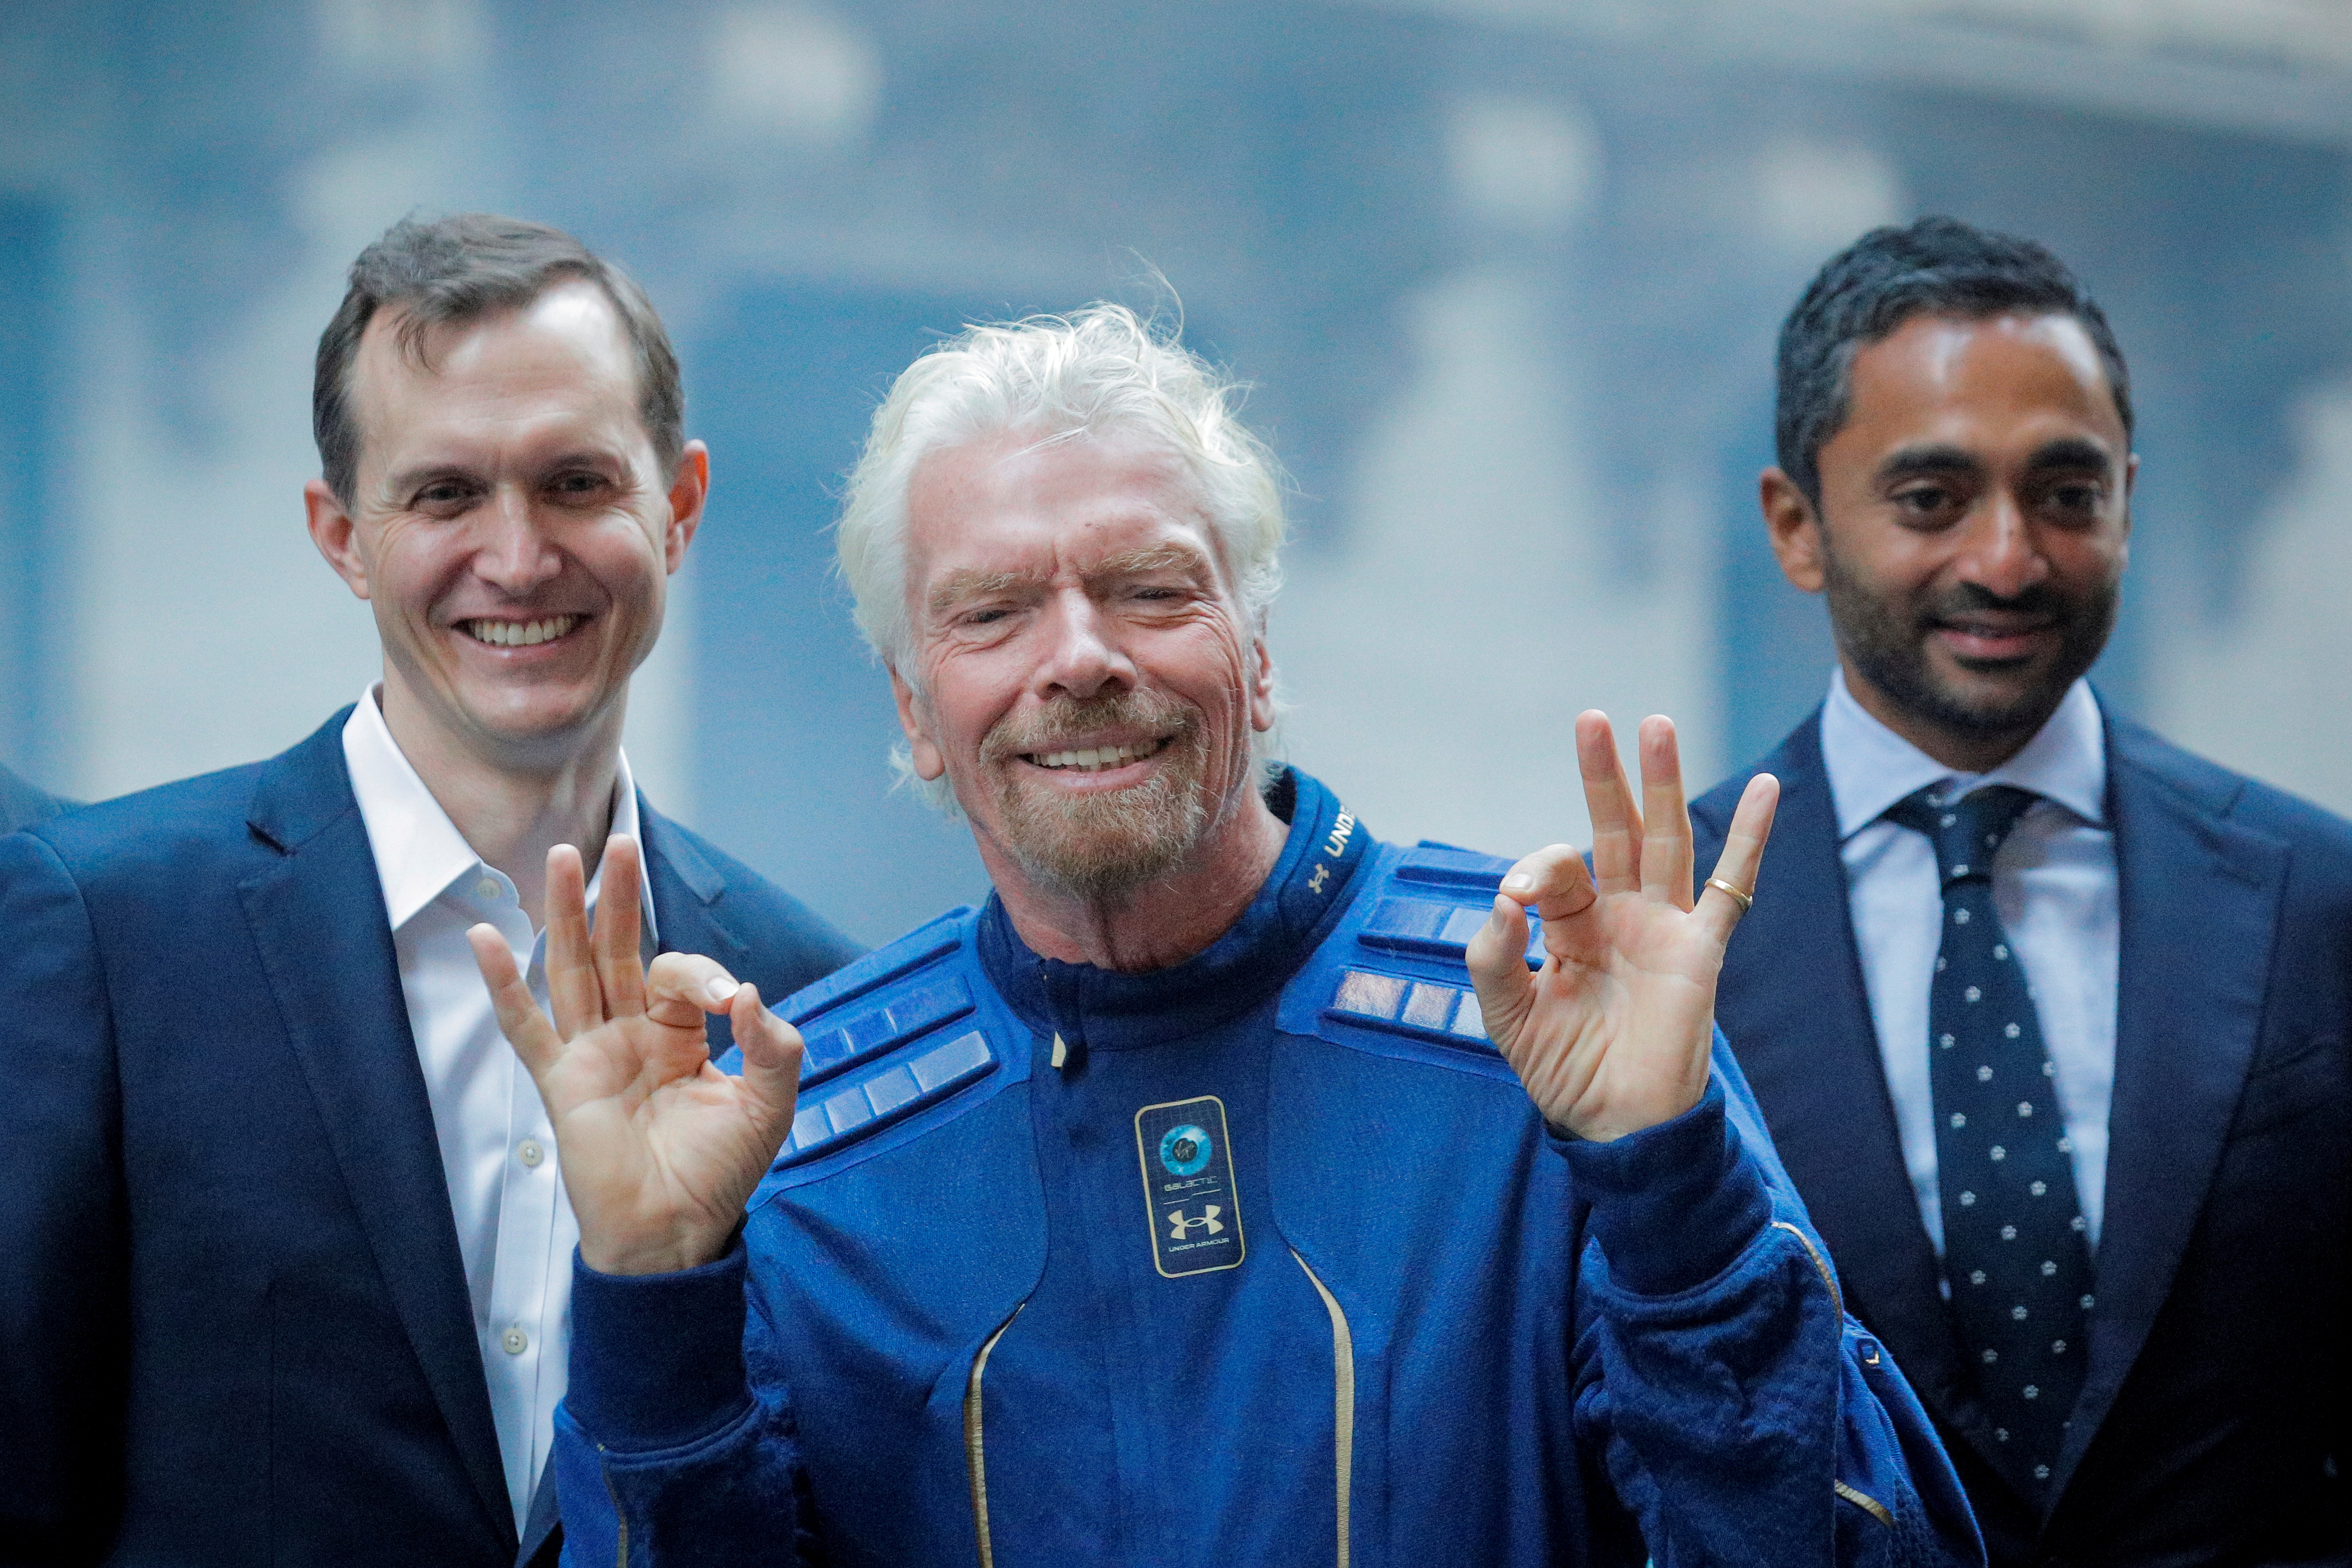 Virgin Galactic co-founder Sir Richard Branson, CEO George Whitesides and Social Capital CEO Chamath Palihapitiya pose together outside of the NYSE as Virgin Galactic (SPCE) begins public trading in New York